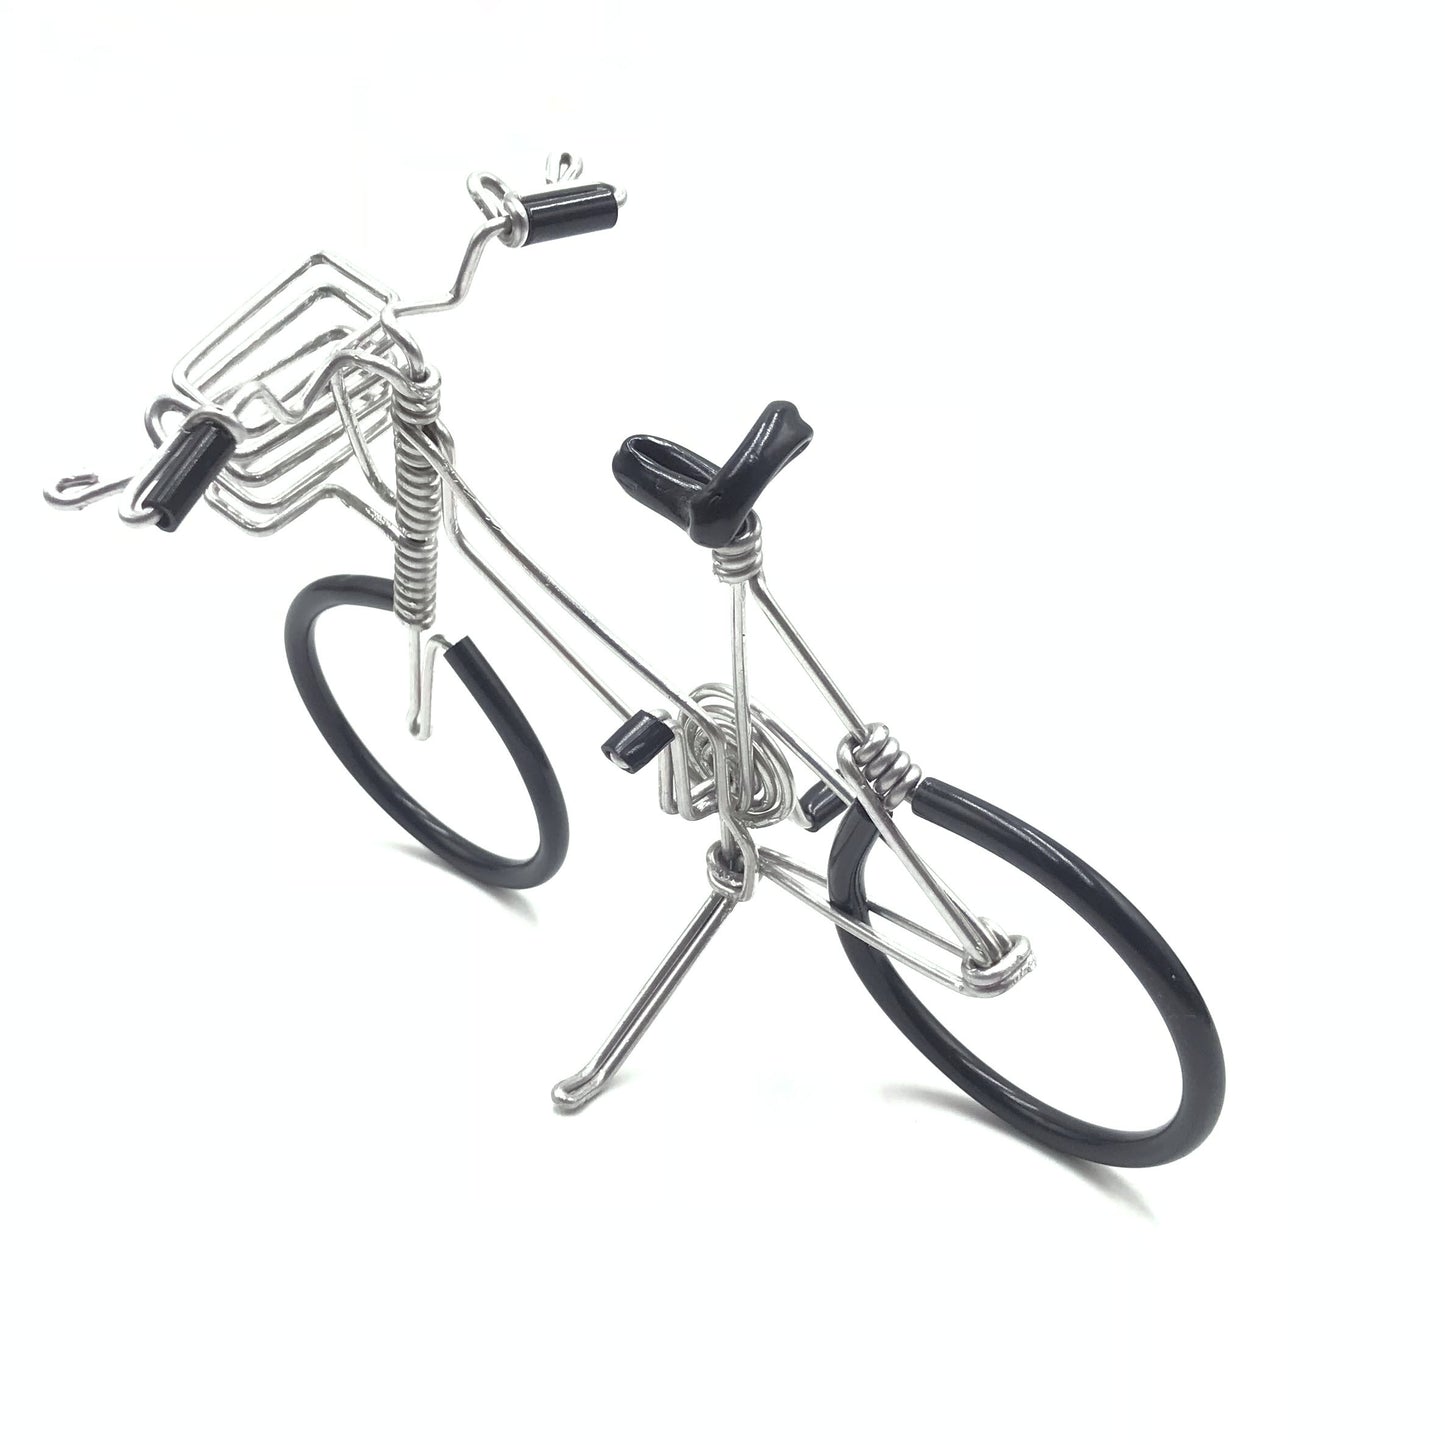 Miniature Wire Art Bicycle C hand-crafted from aluminium wire